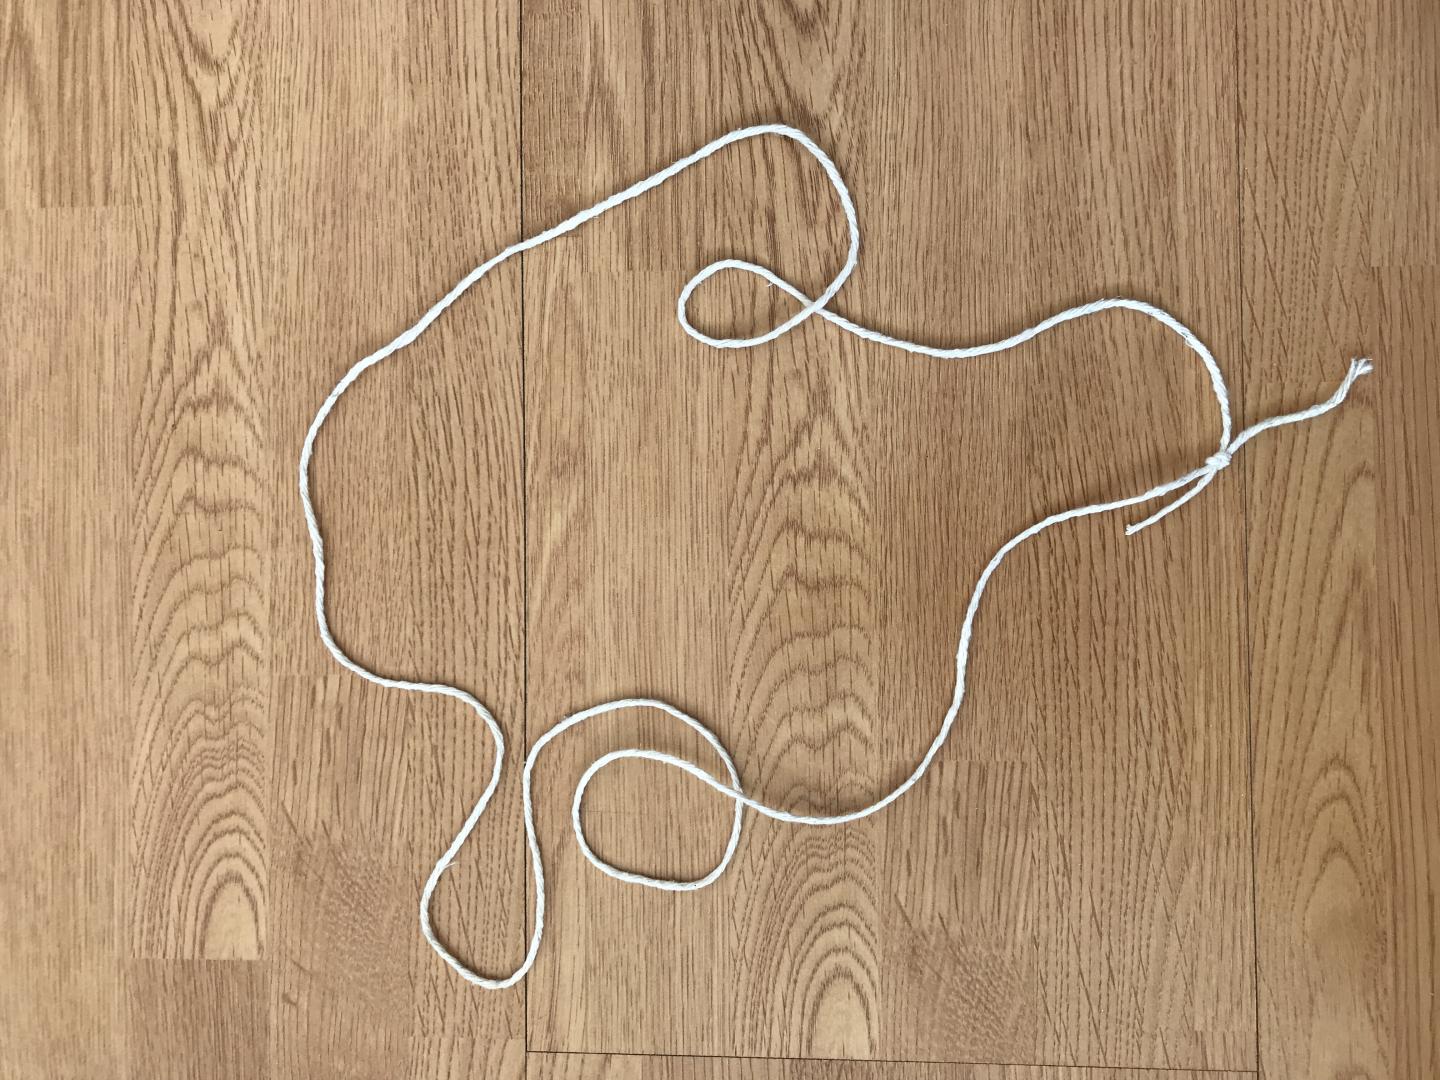 A long piece of string with both ends tied together to create a loop. 